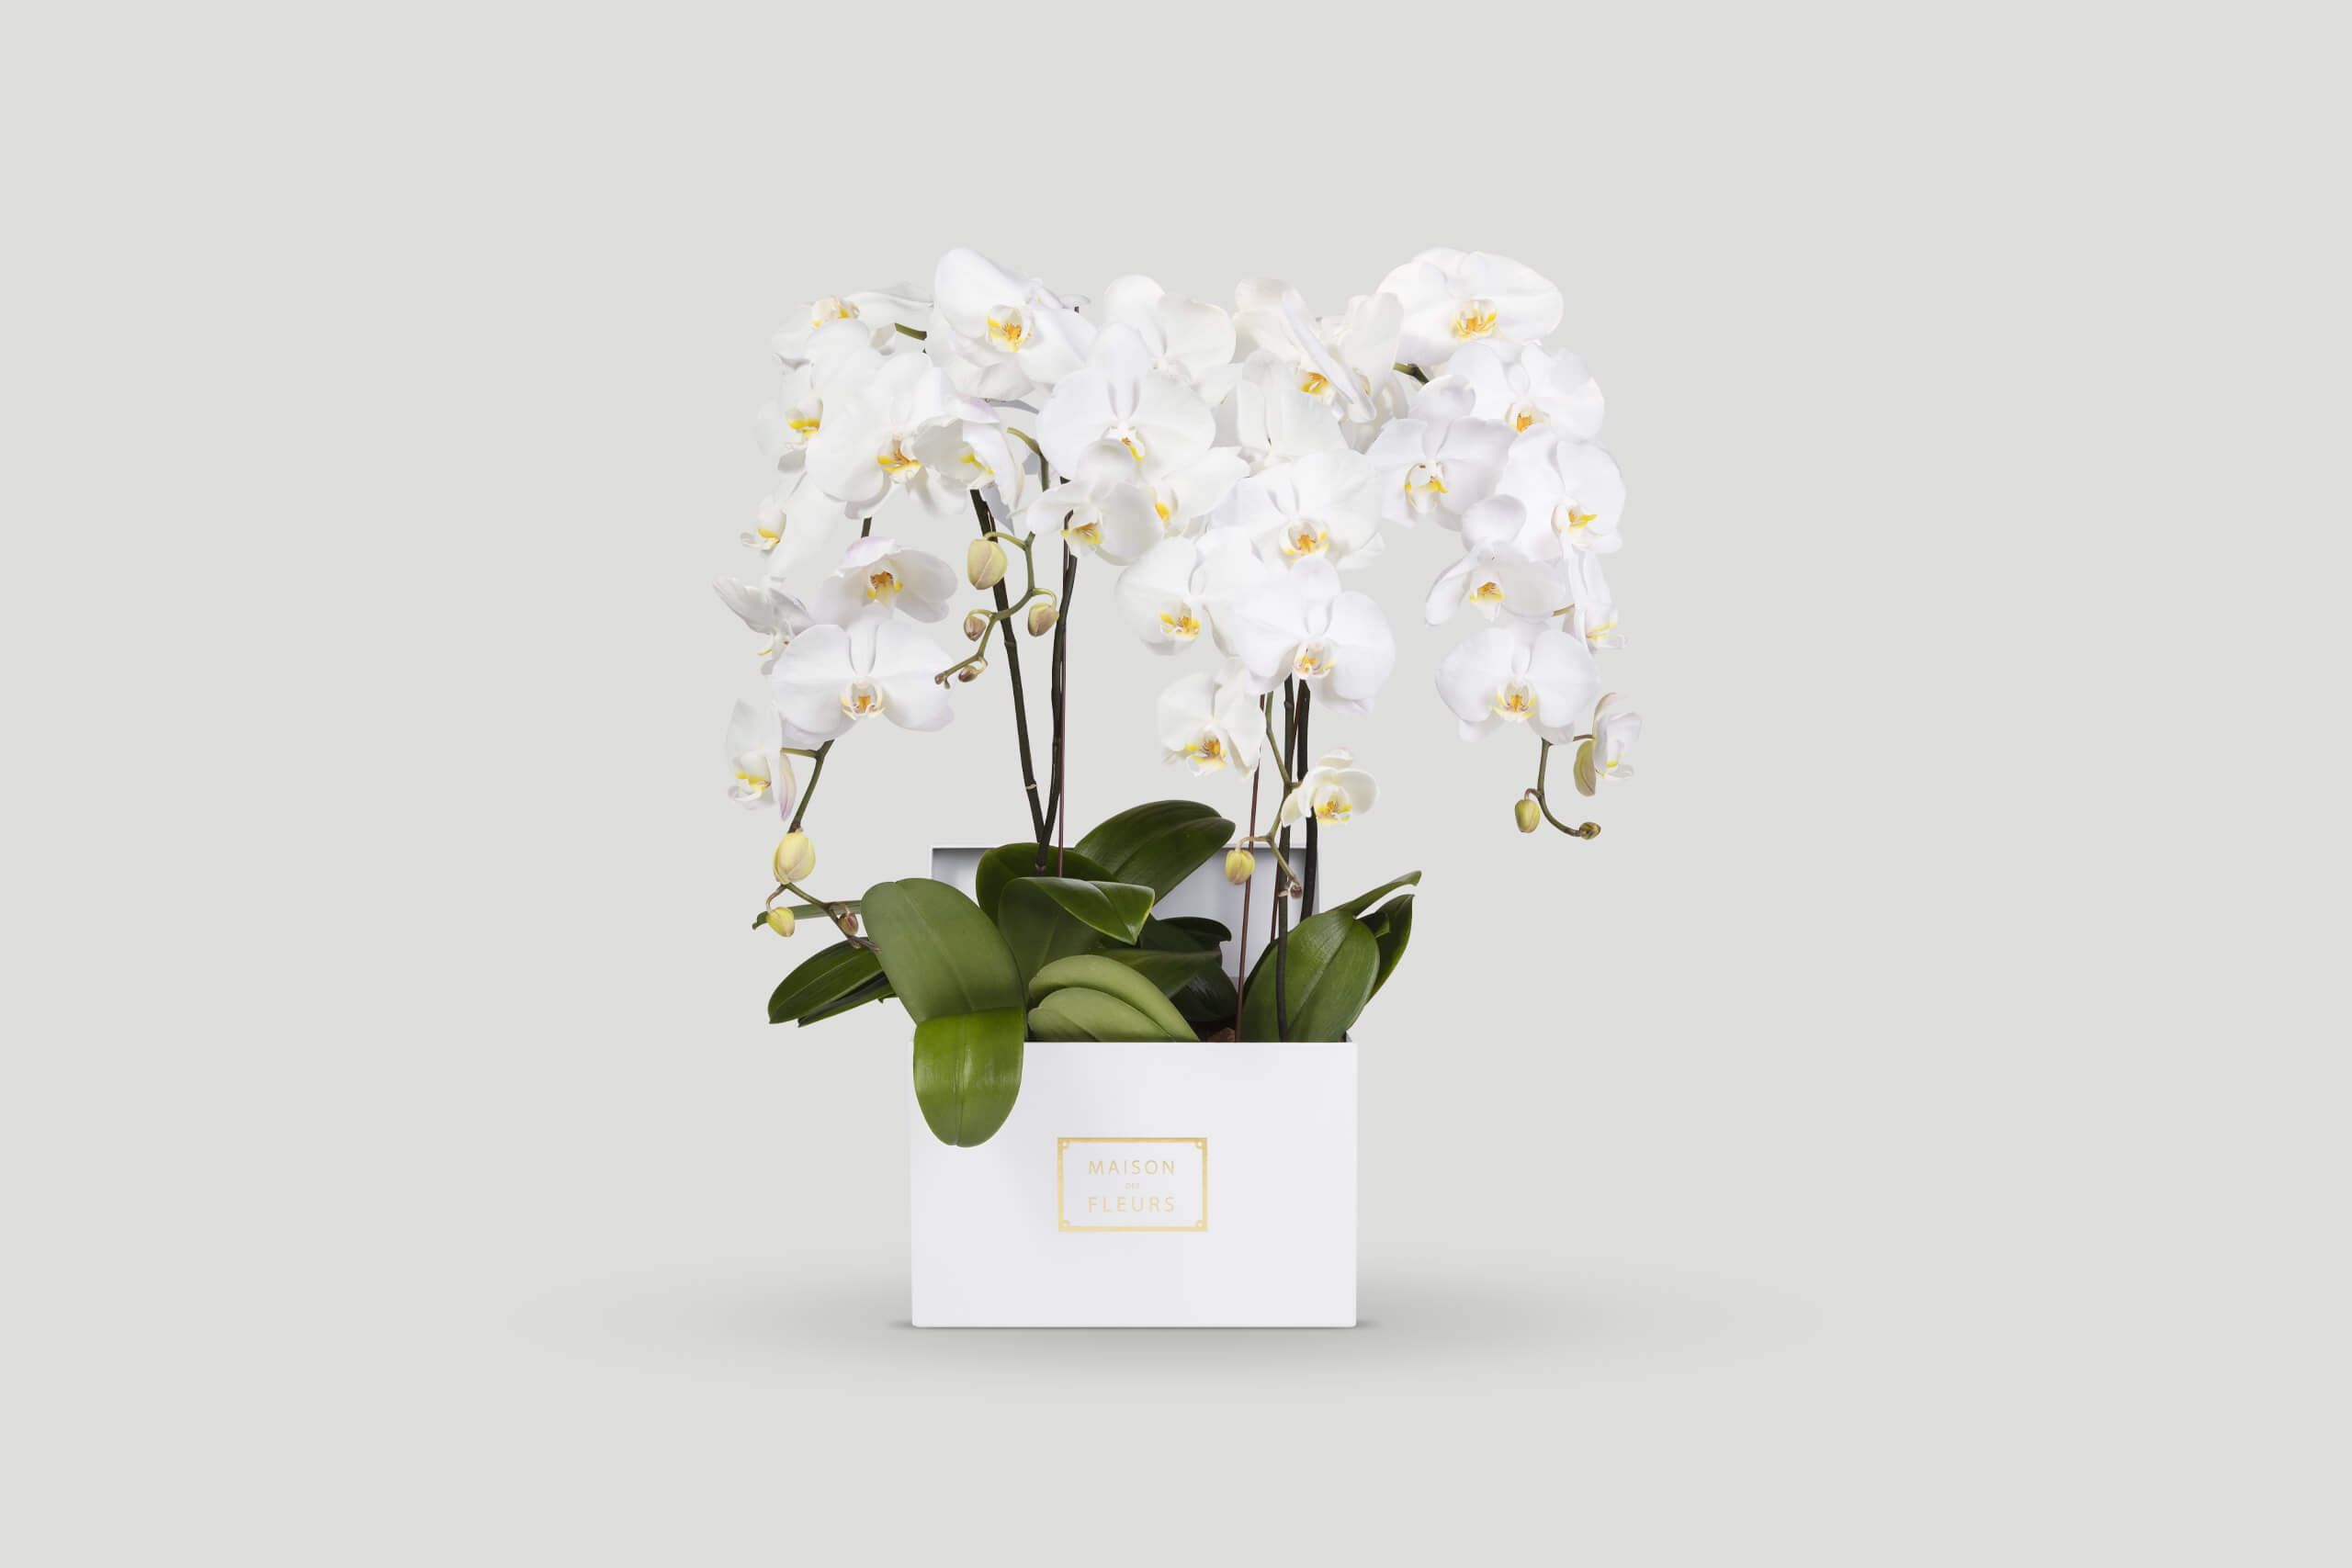 3 fresh white orchids in a box.